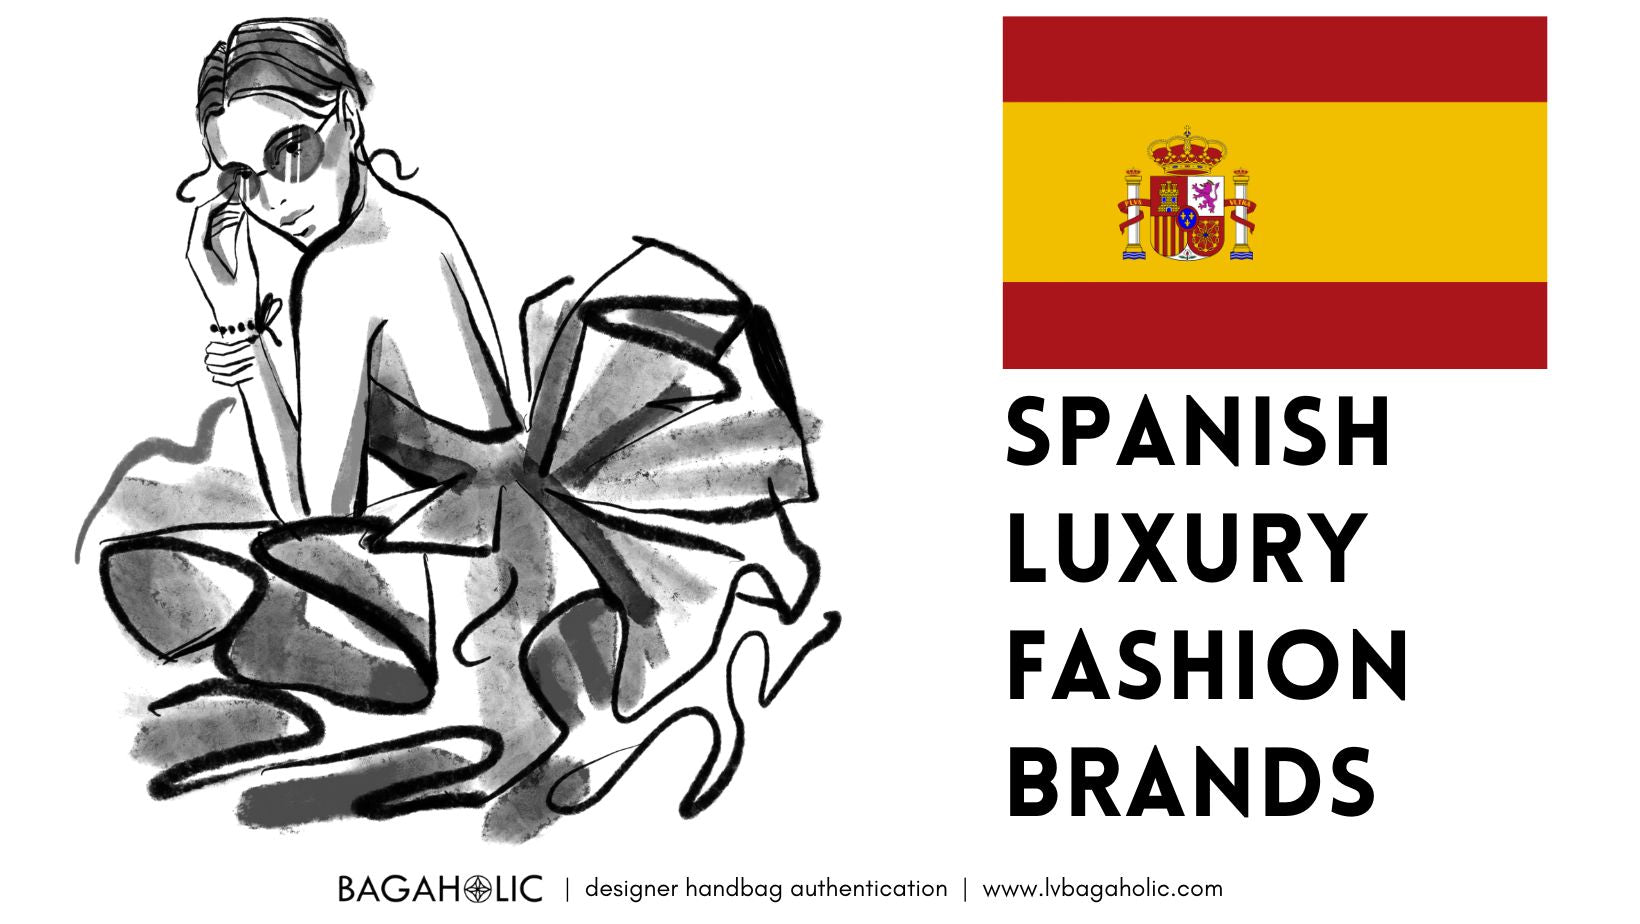 What Are 11 Top Spanish Luxury Fashion Brands Known For? Bagaholic